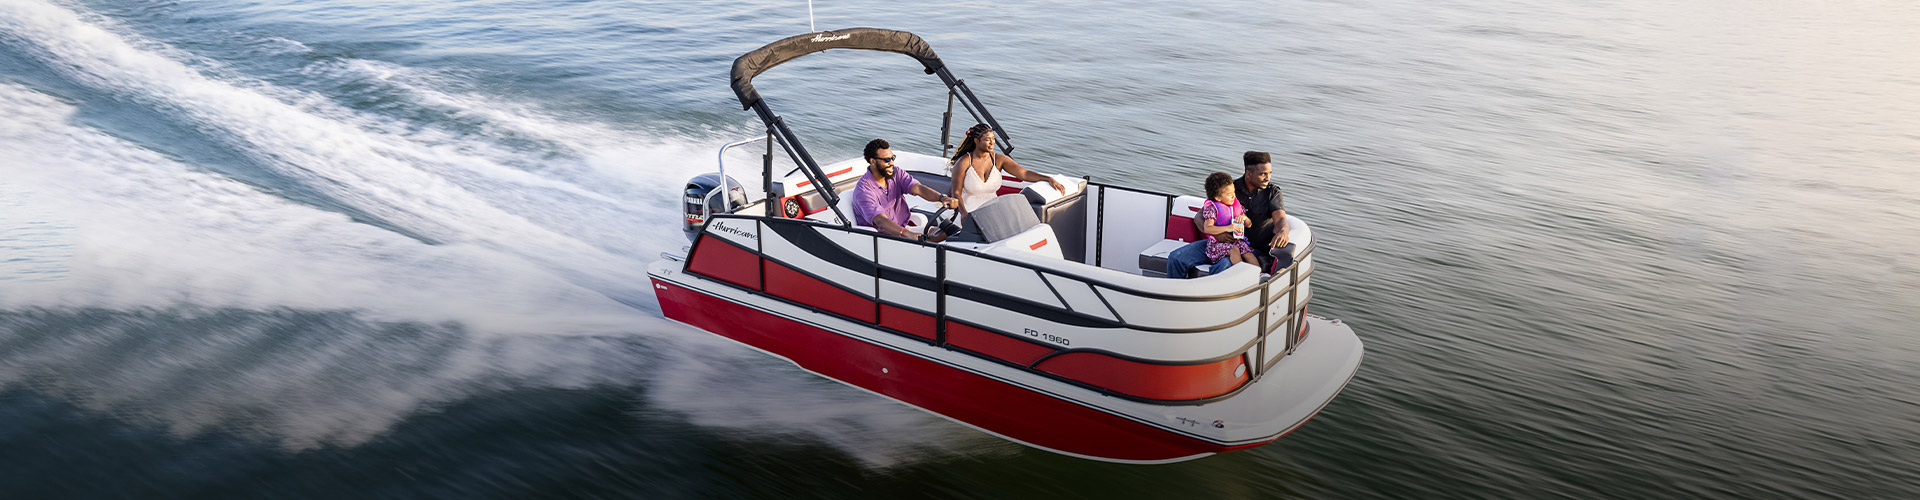 Boat Gadgets and Equipment That Makes Boating A Little Bit More Exciting, by Bendigo Marine AU